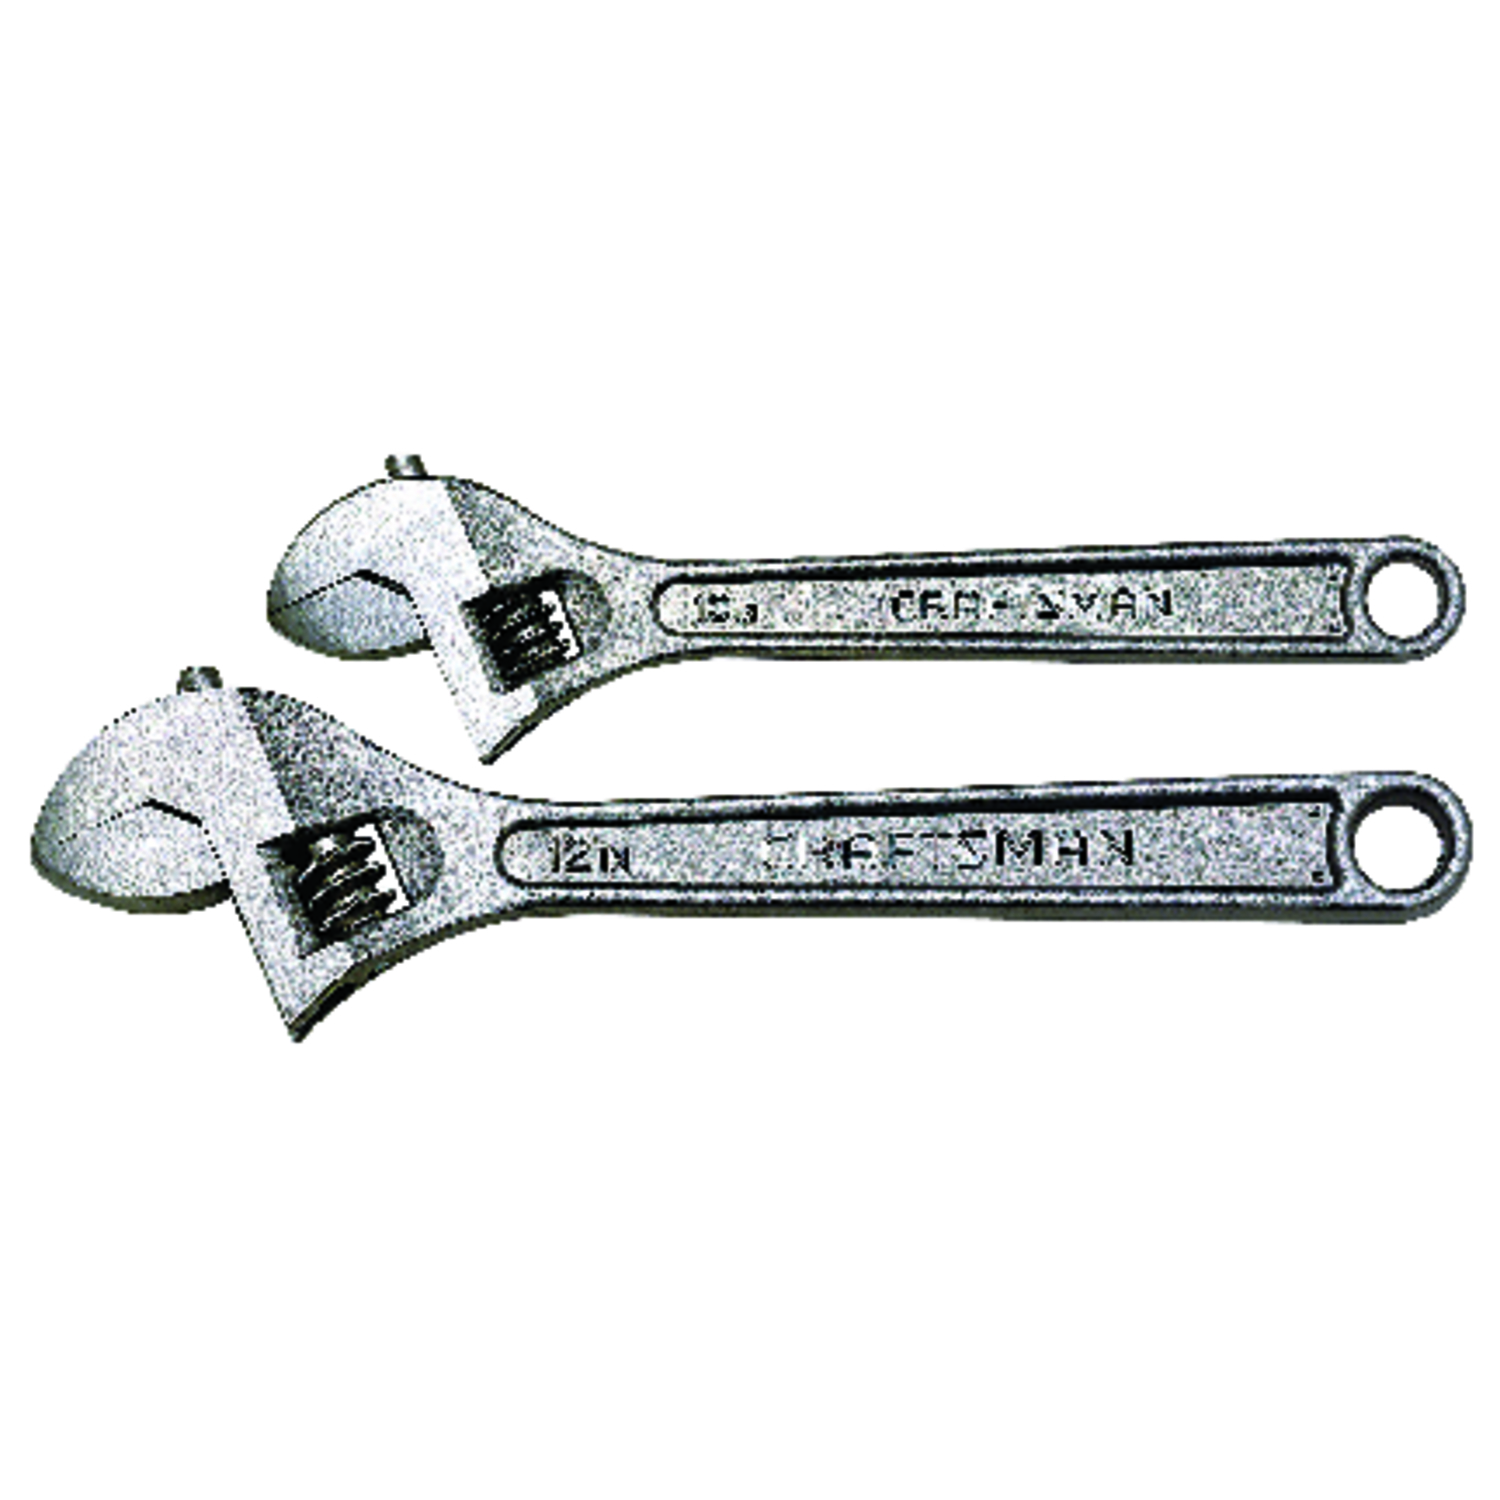 UPC 885911594196 product image for Craftsman 12 in. L Metric and SAE Adjustable Wrench Set 2 pc. | upcitemdb.com